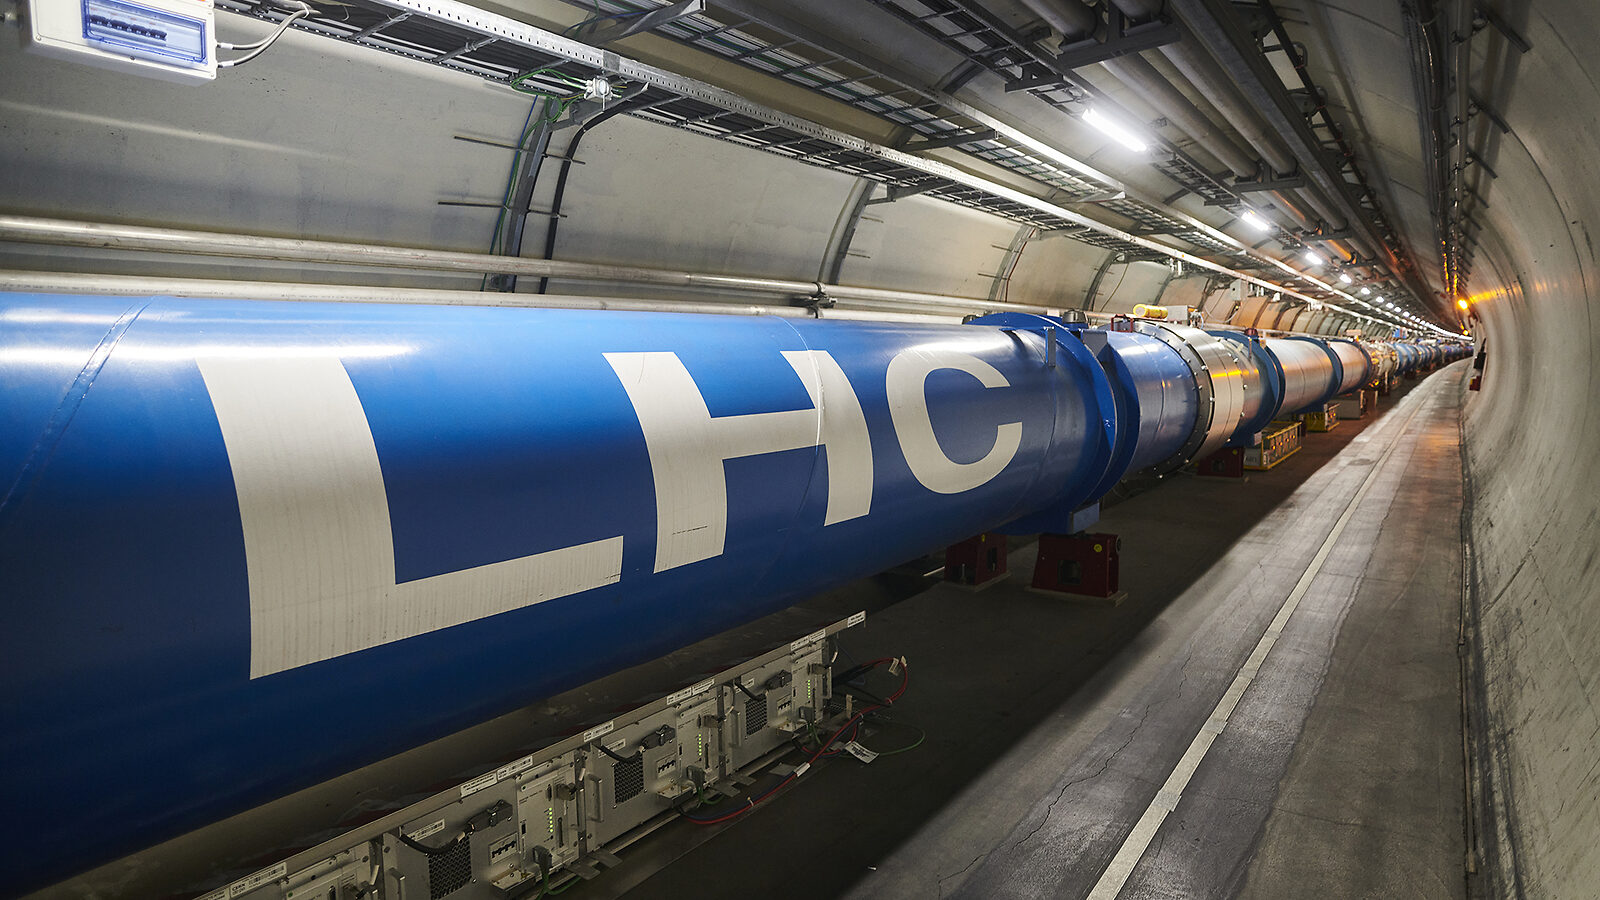 Photo of the LHC tunnel